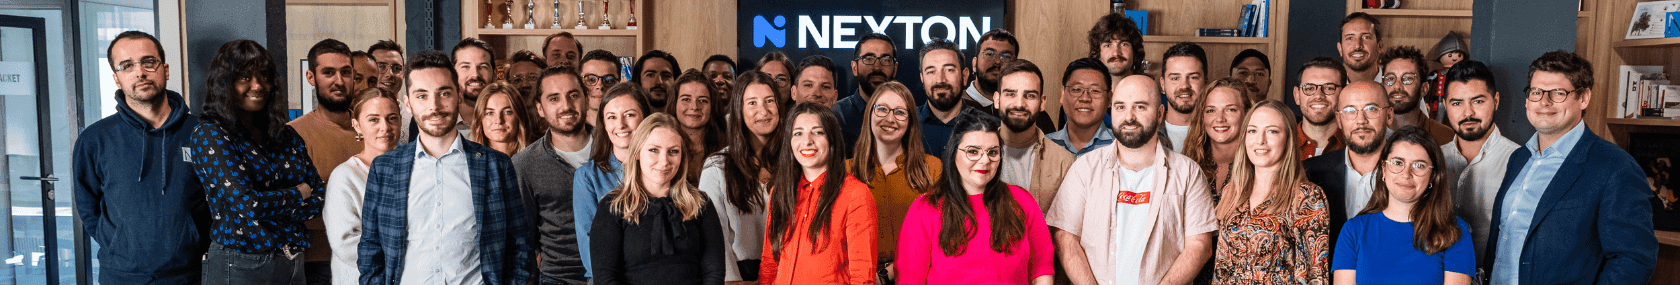 Nexton Consulting header cover image